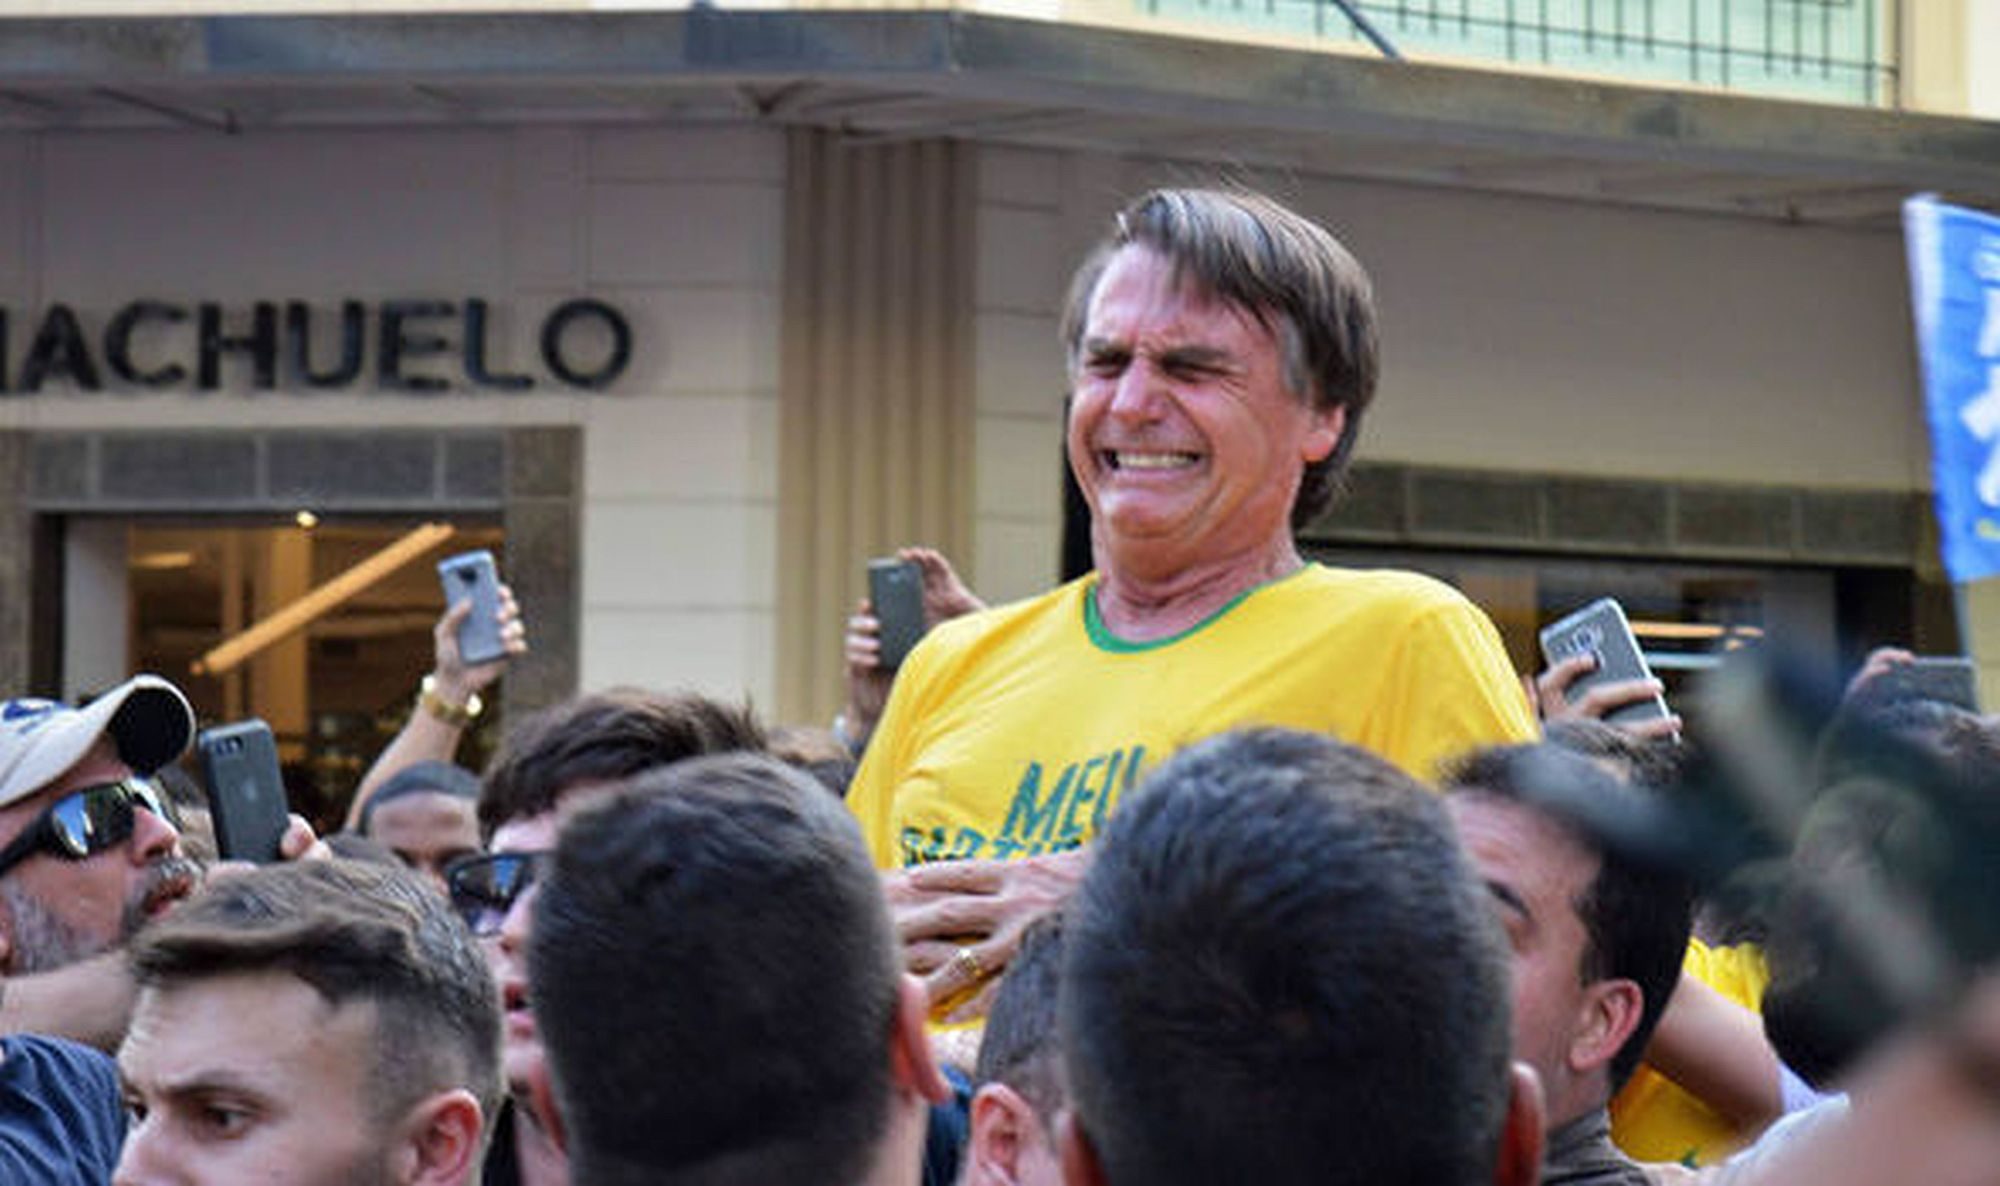 Jair Bolsonaro, the moment he is hit by a knife